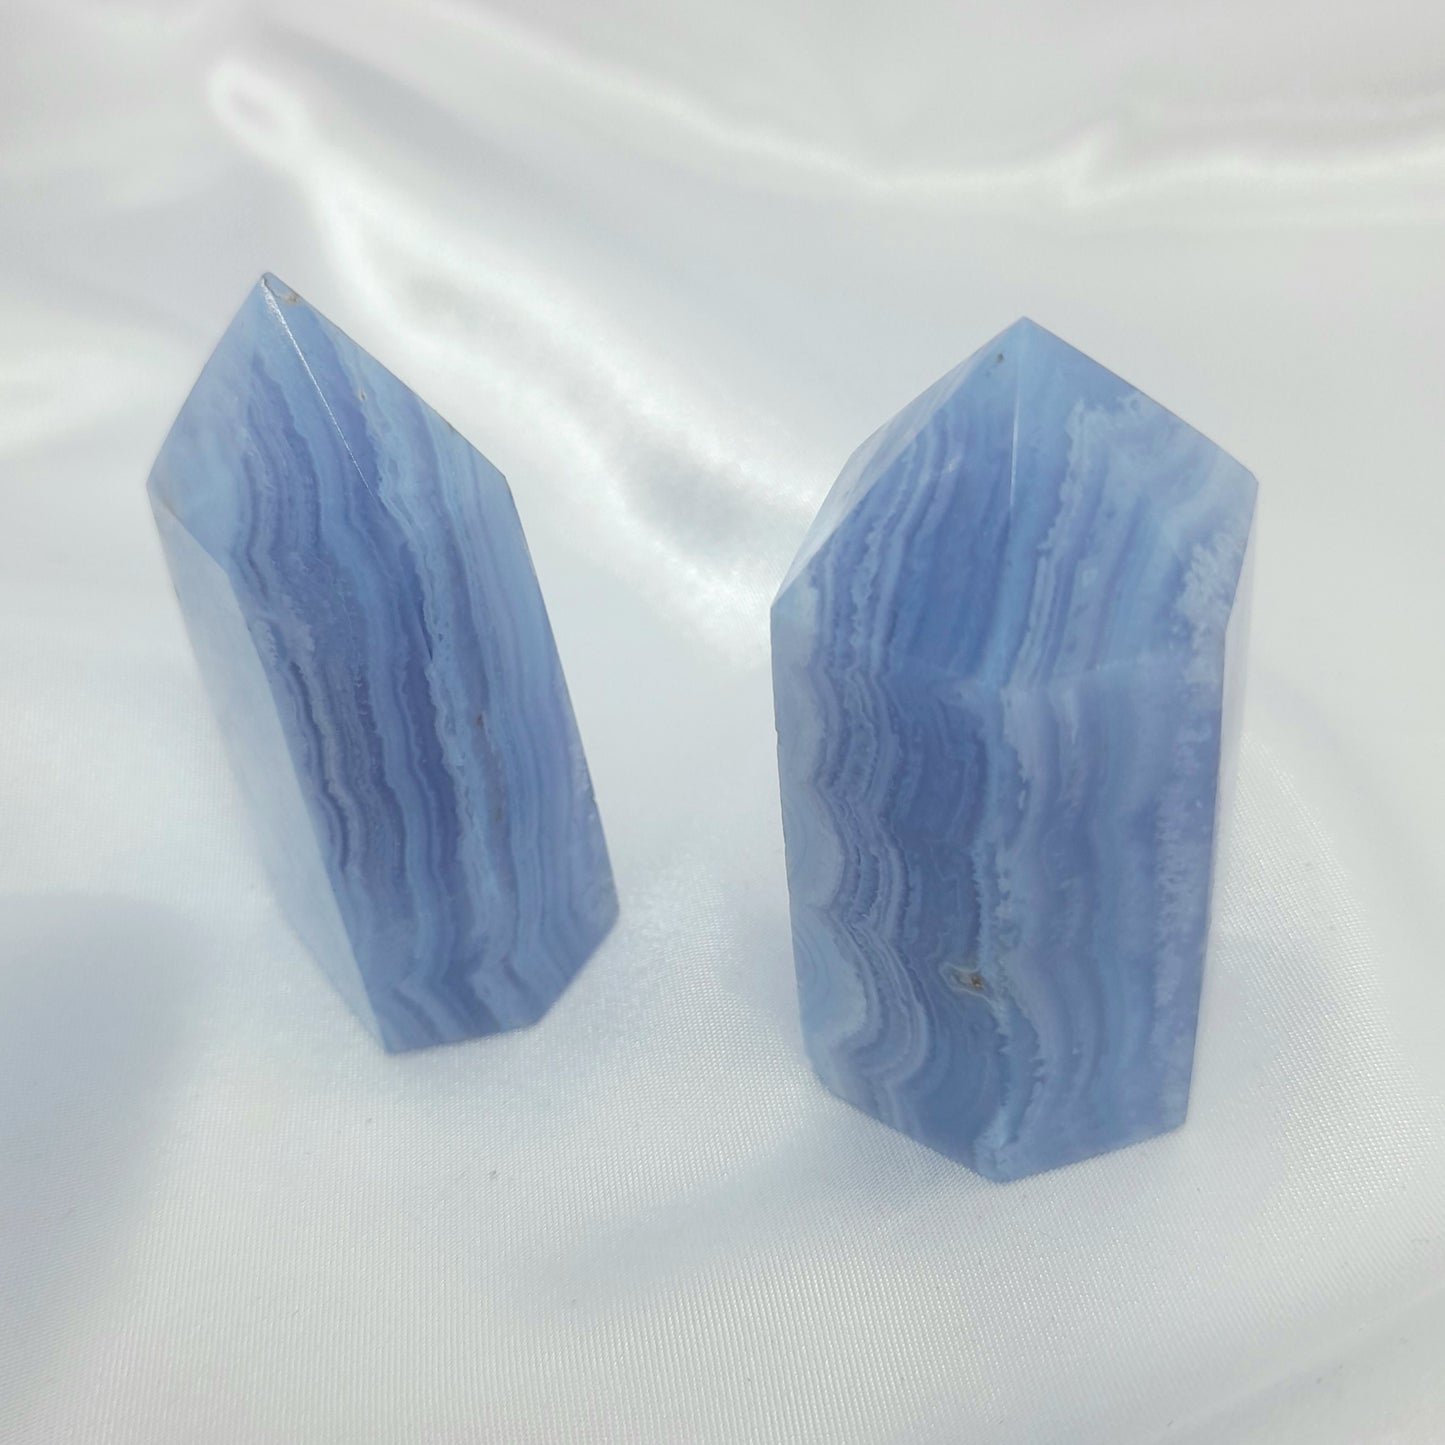 Blue Lace Agate Point - Spiritual Tranquility Crystal, 6cm Size - Alleviates Loneliness and Anxiety, Grounding and Enlightening